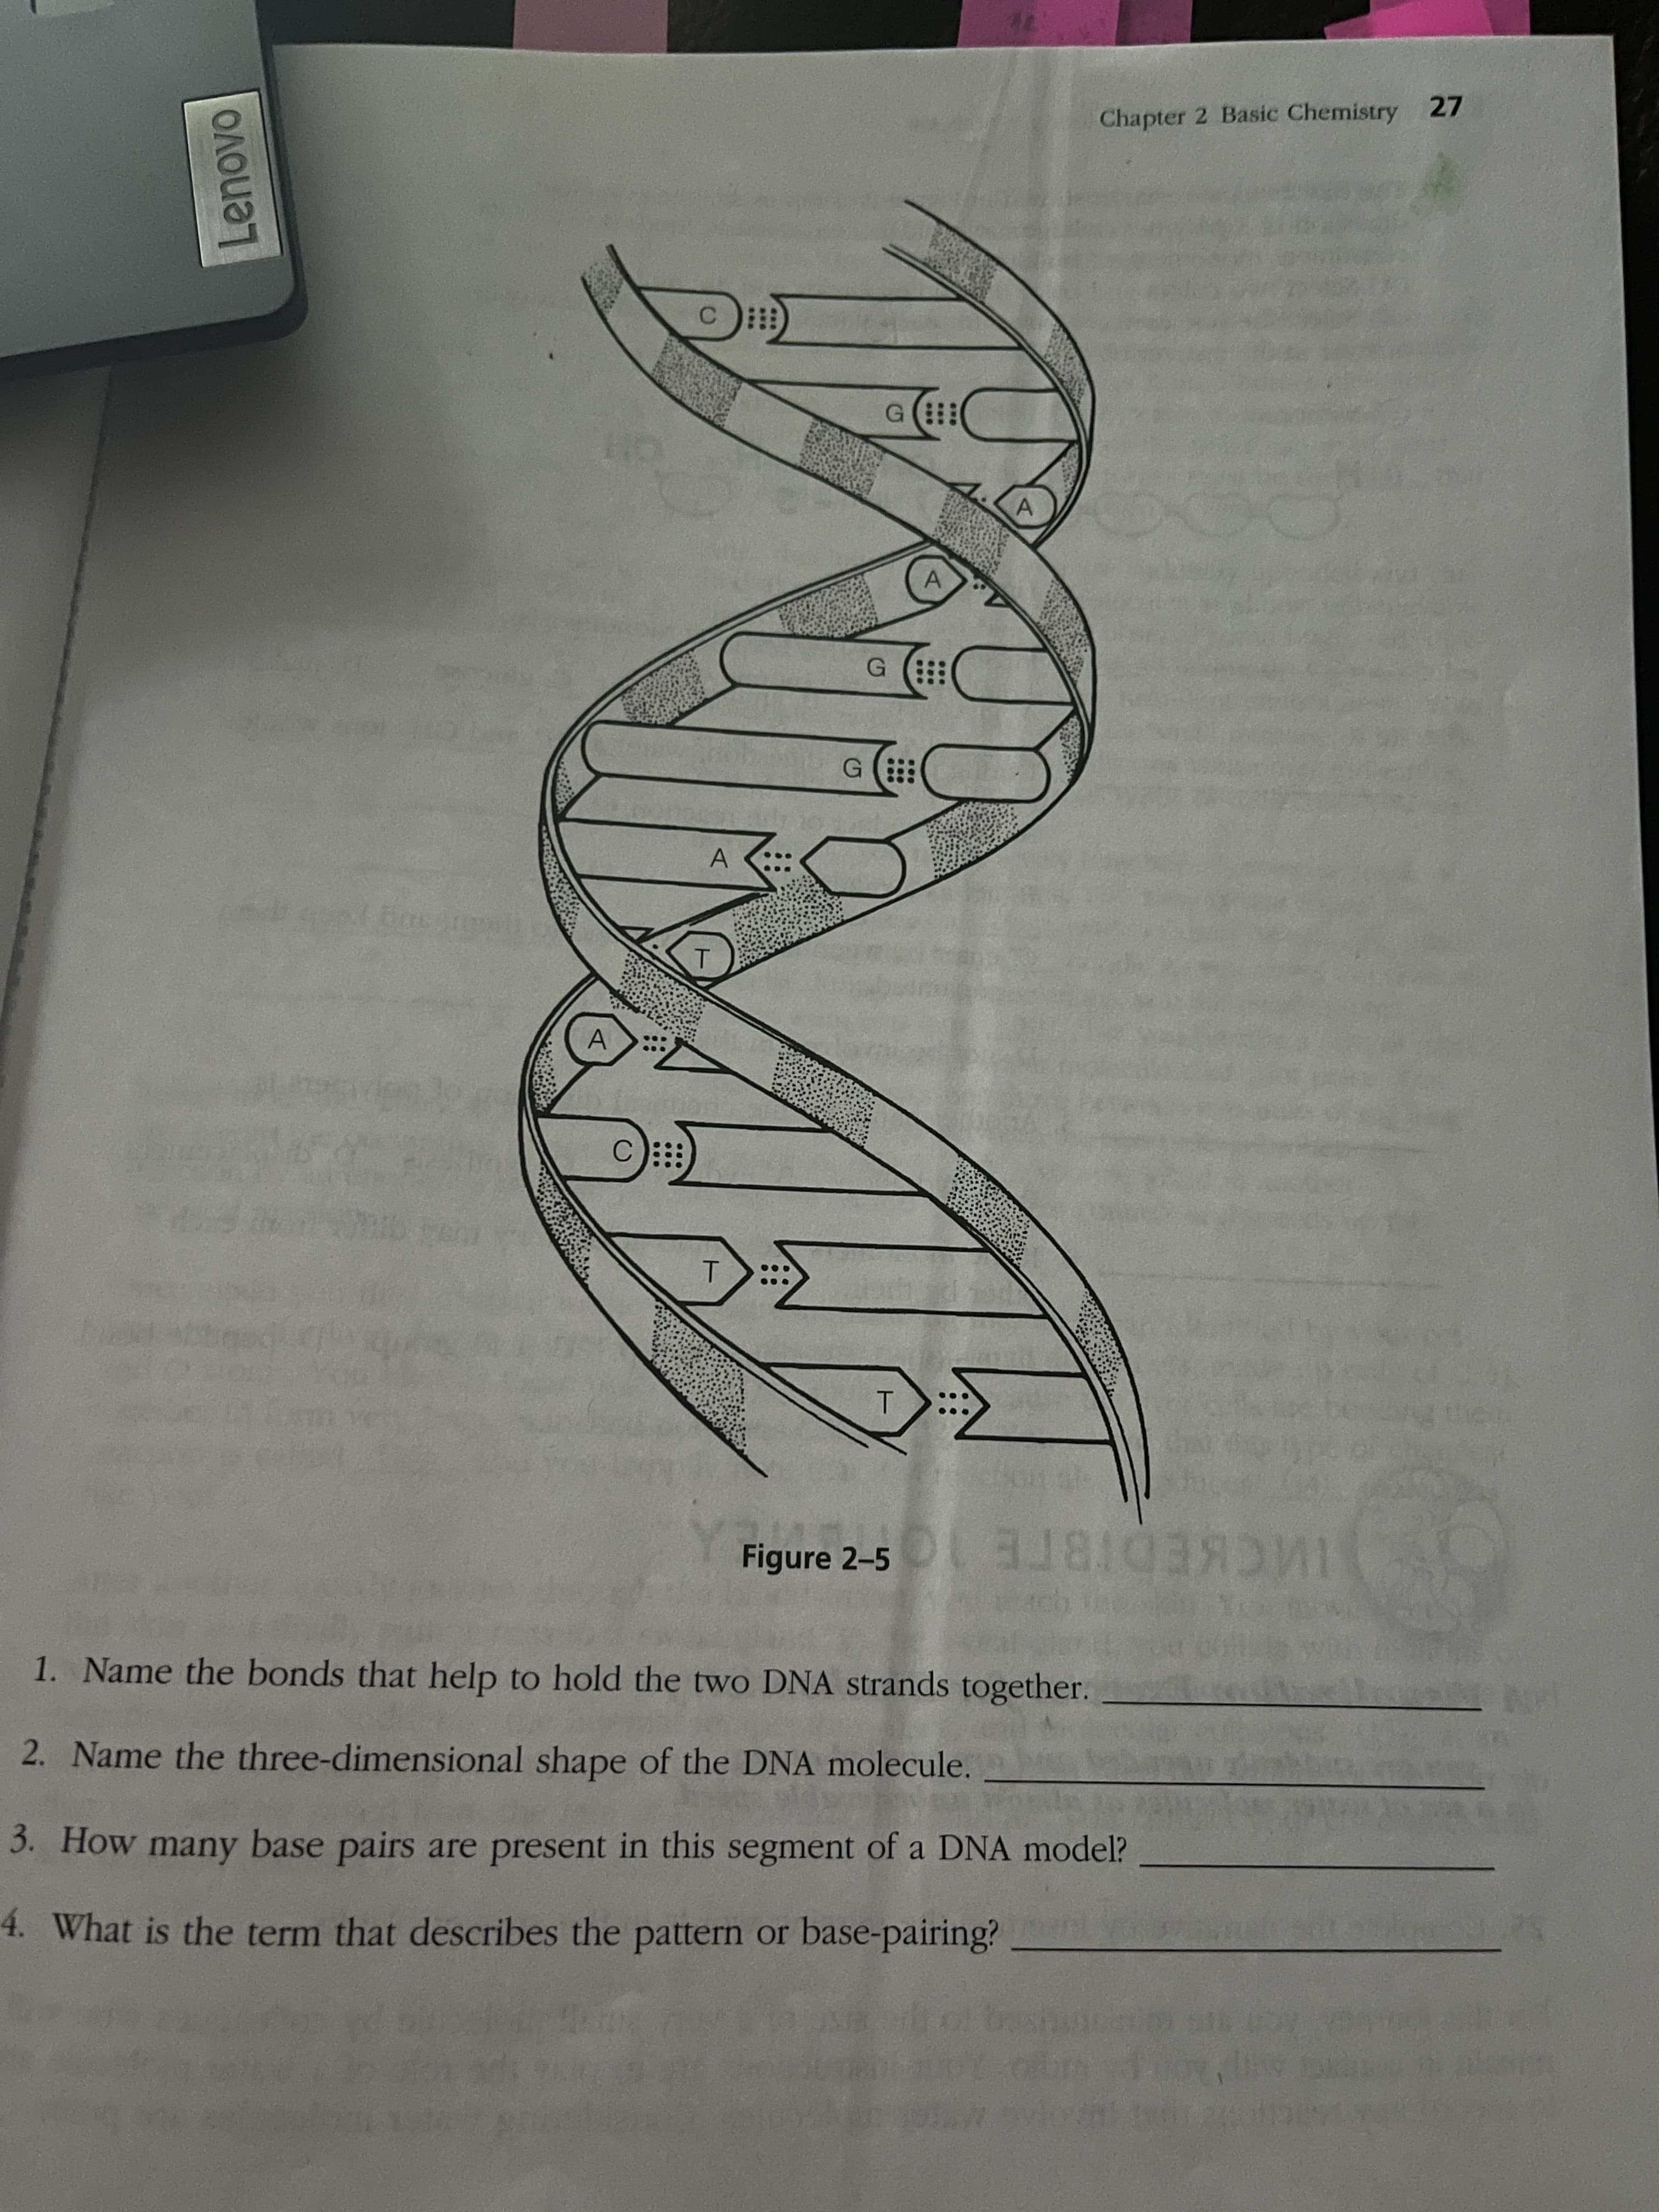 1. Name the bonds that help to hold the two DNA strands together.
2. Name the three-dimensional shape of the DNA molecule.
3. How many base pairs are present in this segment of a DNA model?
4. What is the term that describes the pattern or base-pairing?
